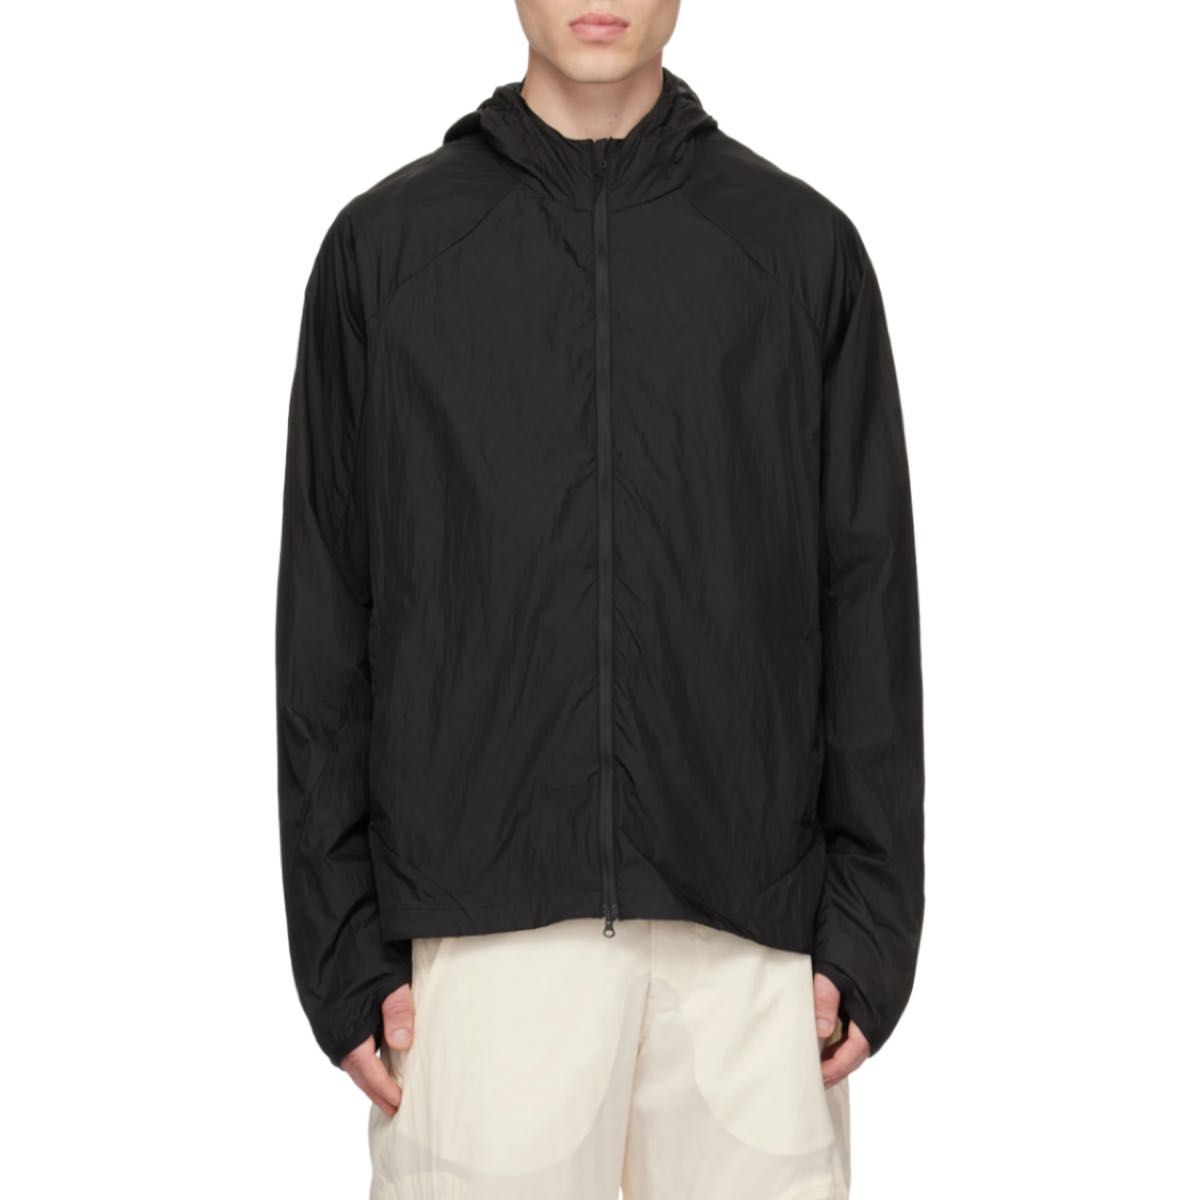 POST ARCHIVE FACTION(PAF)5.0+ TECHNICAL JACKET CENTER